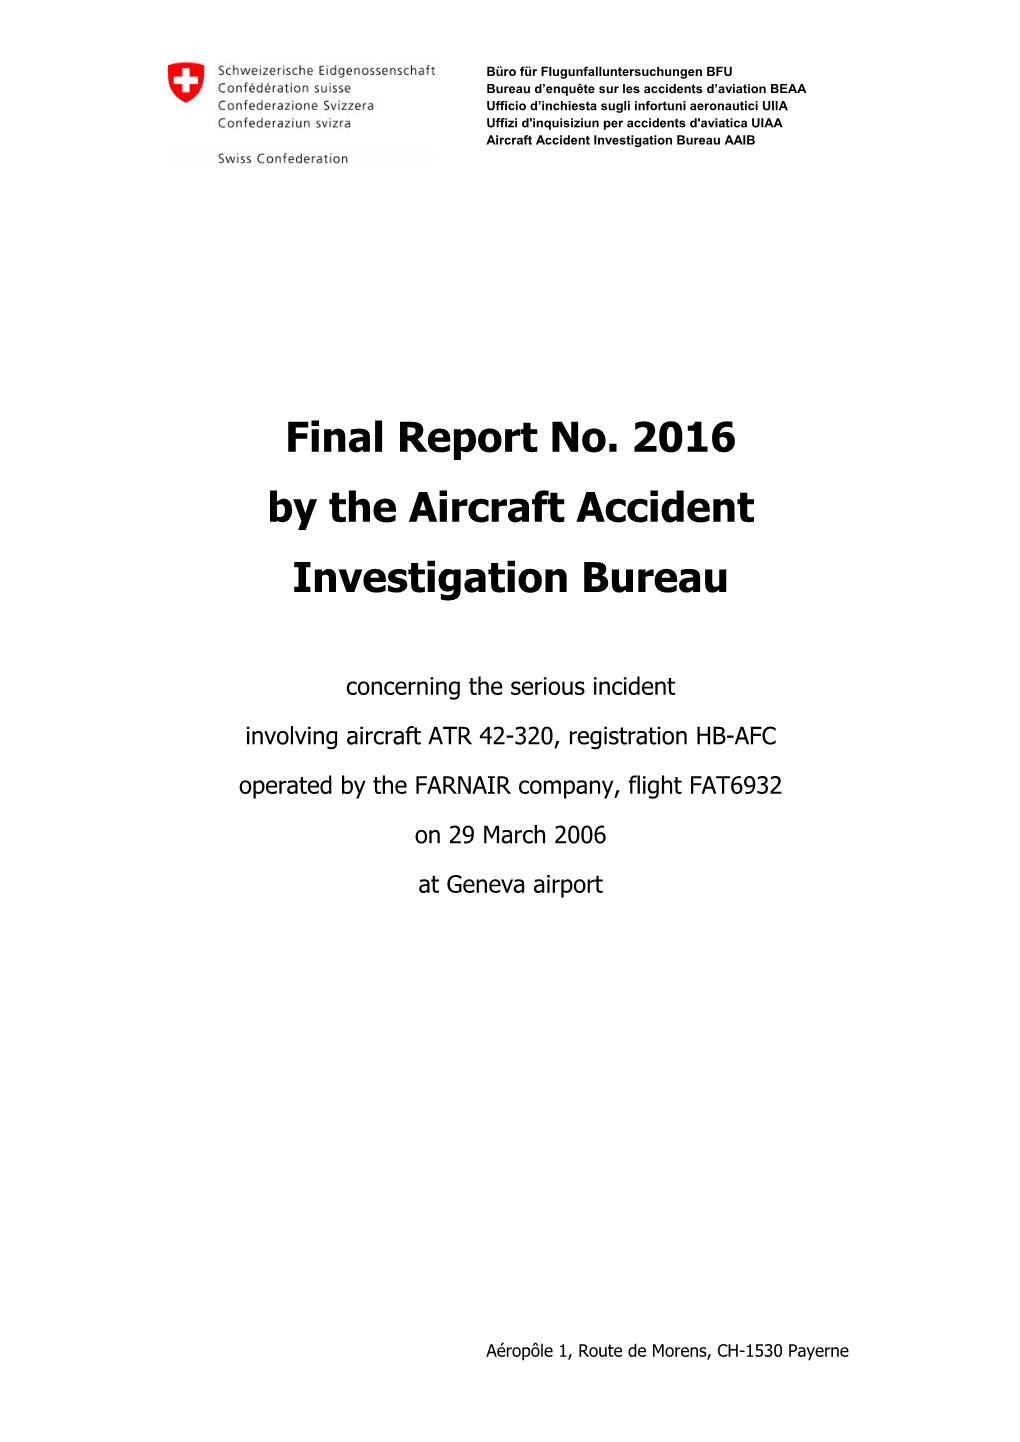 Final Report No. 2016 by the Aircraft Accident Investigation Bureau